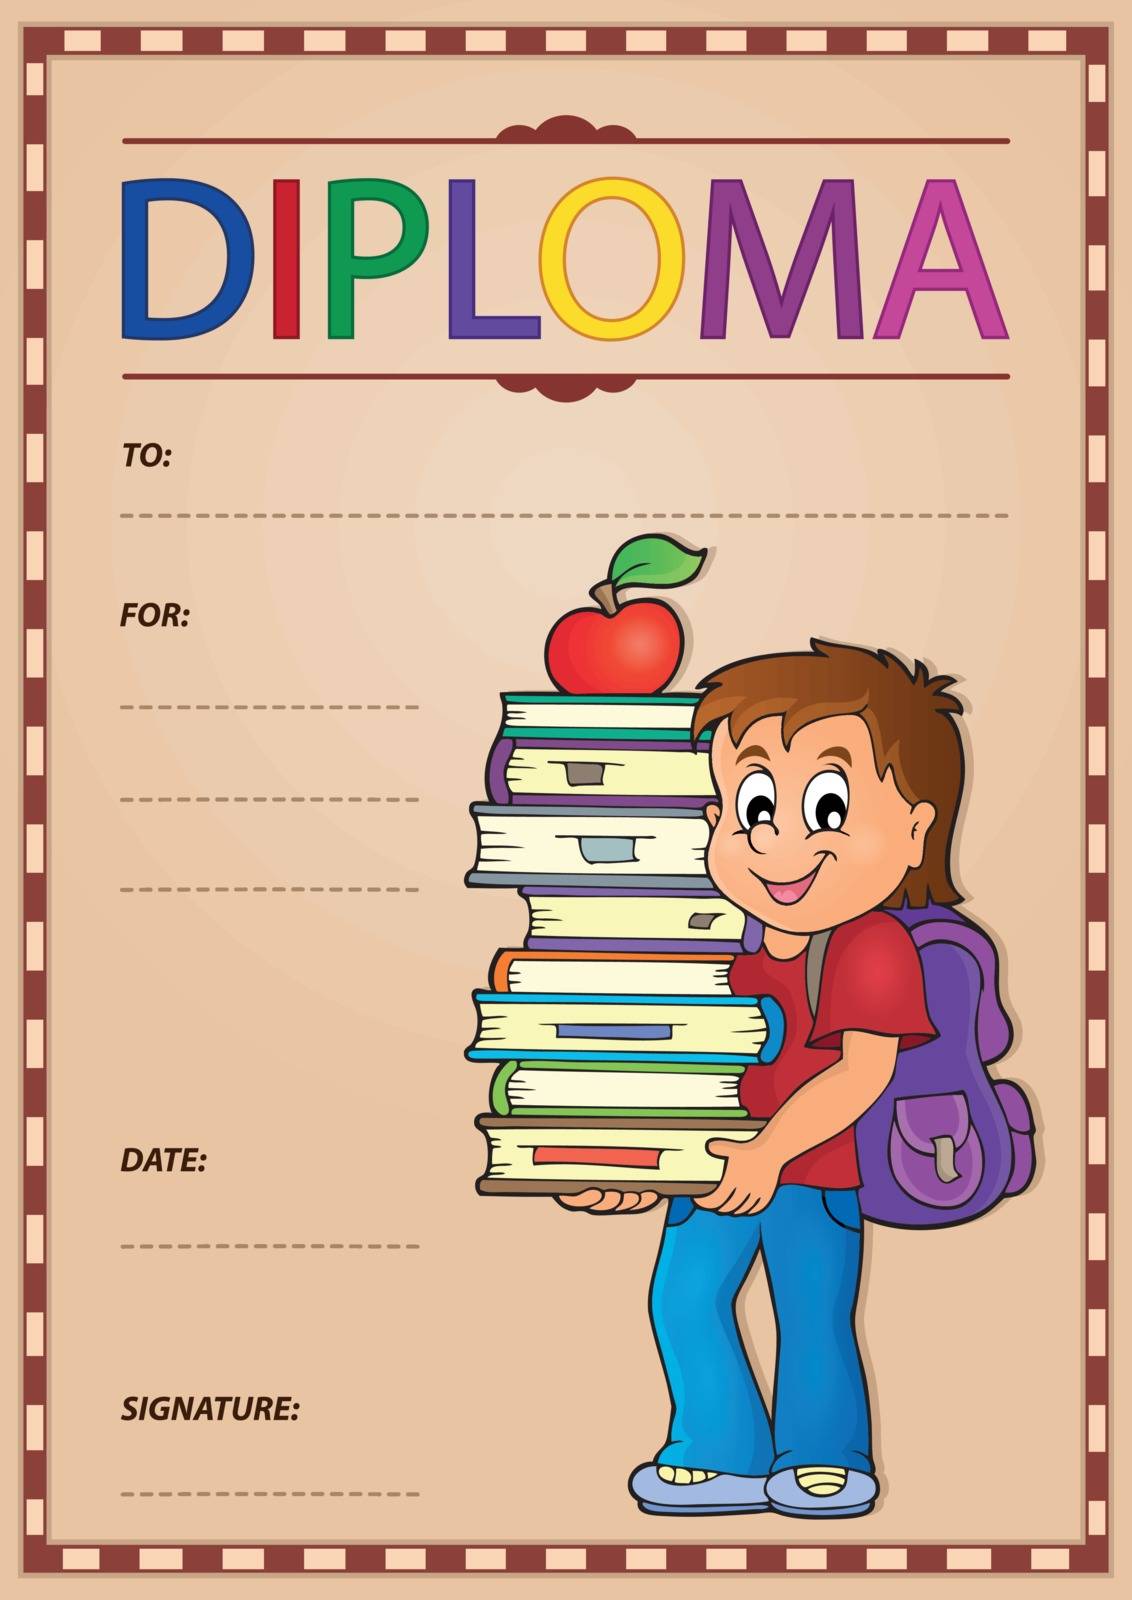 Diploma composition image 3 - eps10 vector illustration.